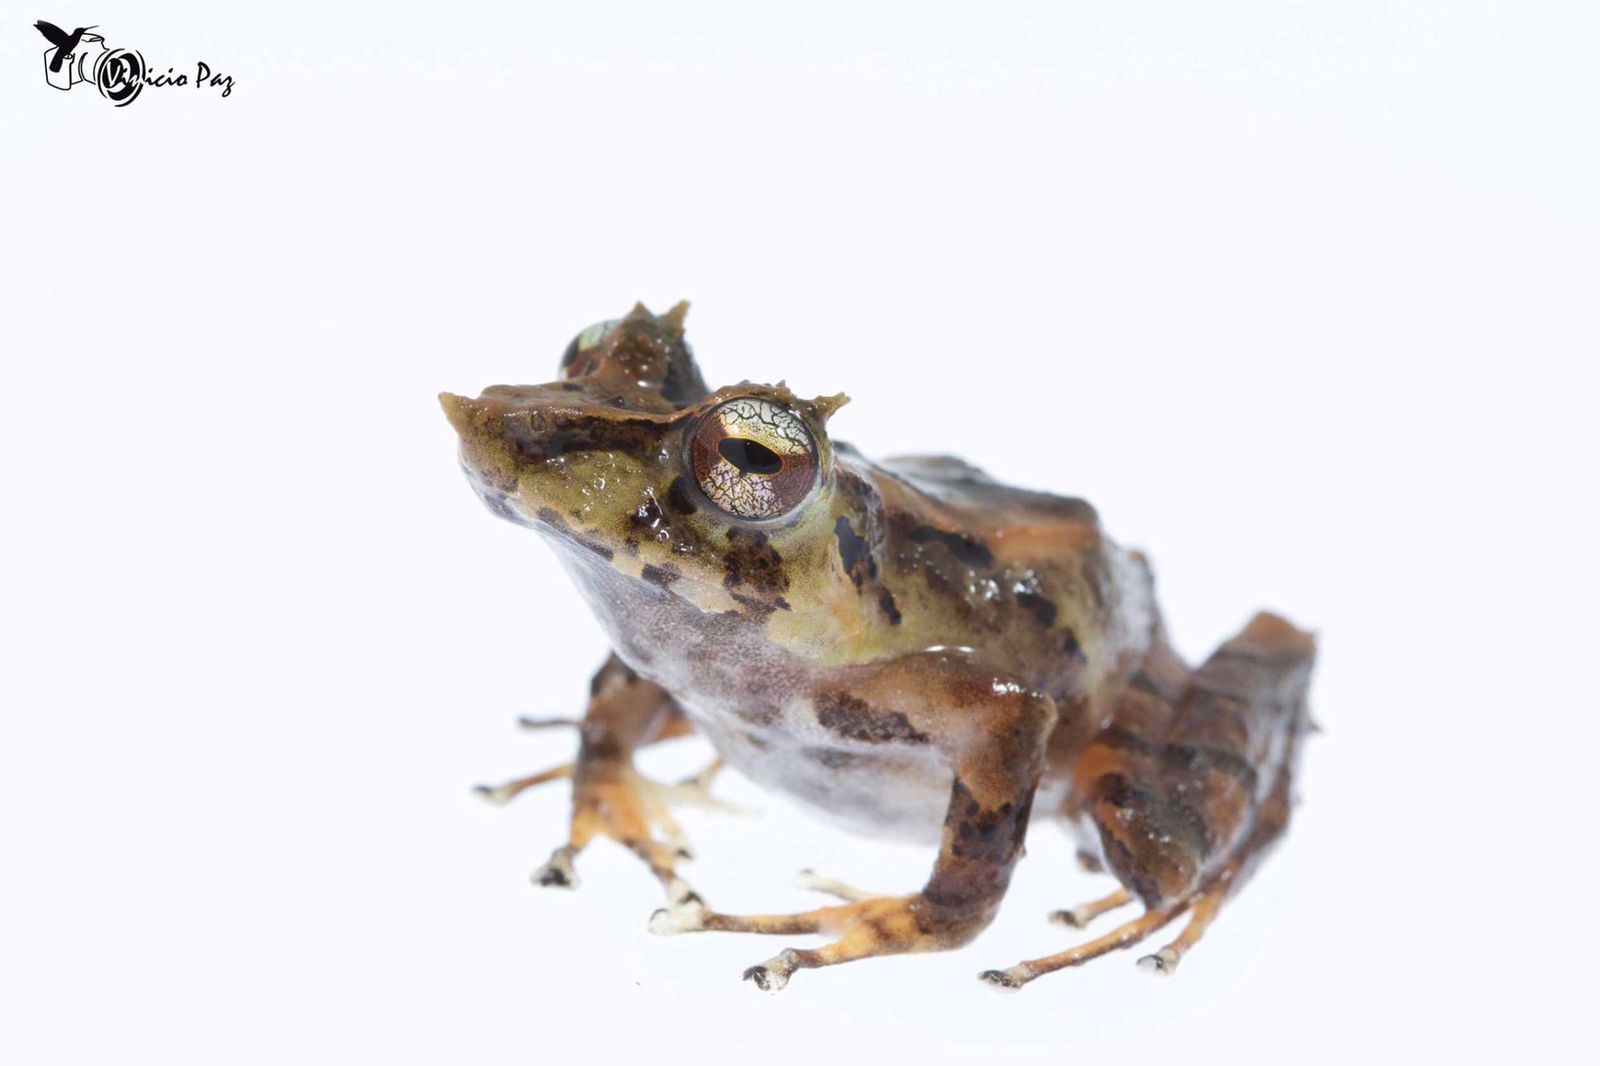 Pinocchio Rainfrog with mottled brown and black skin and huge, glass-like eyes